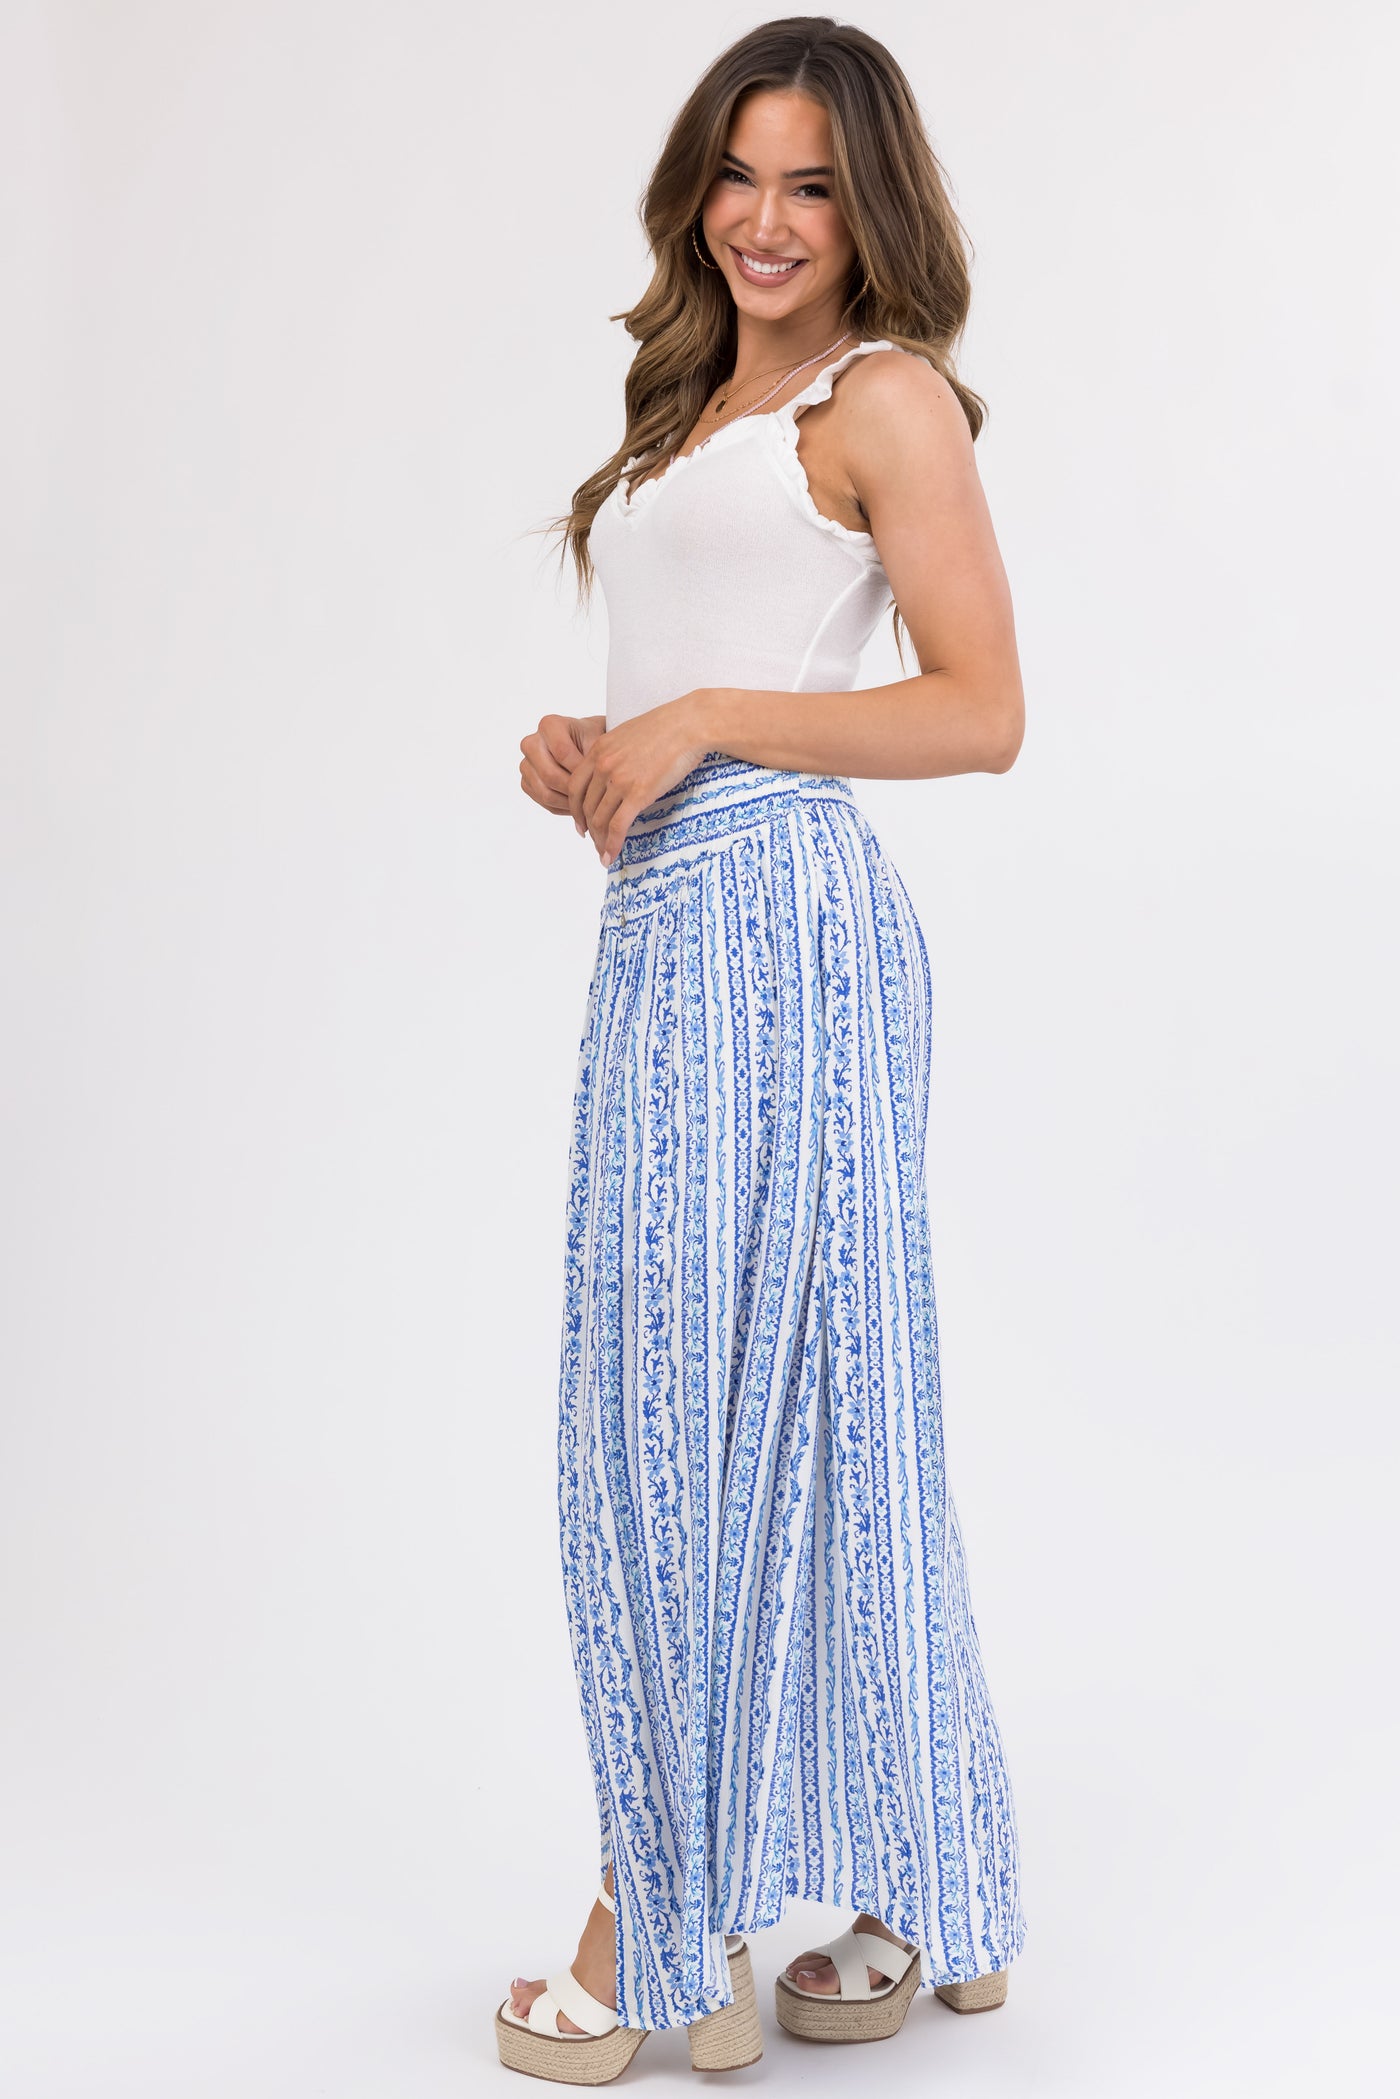 Ivory and Cobalt Front Slit Button Maxi Skirt